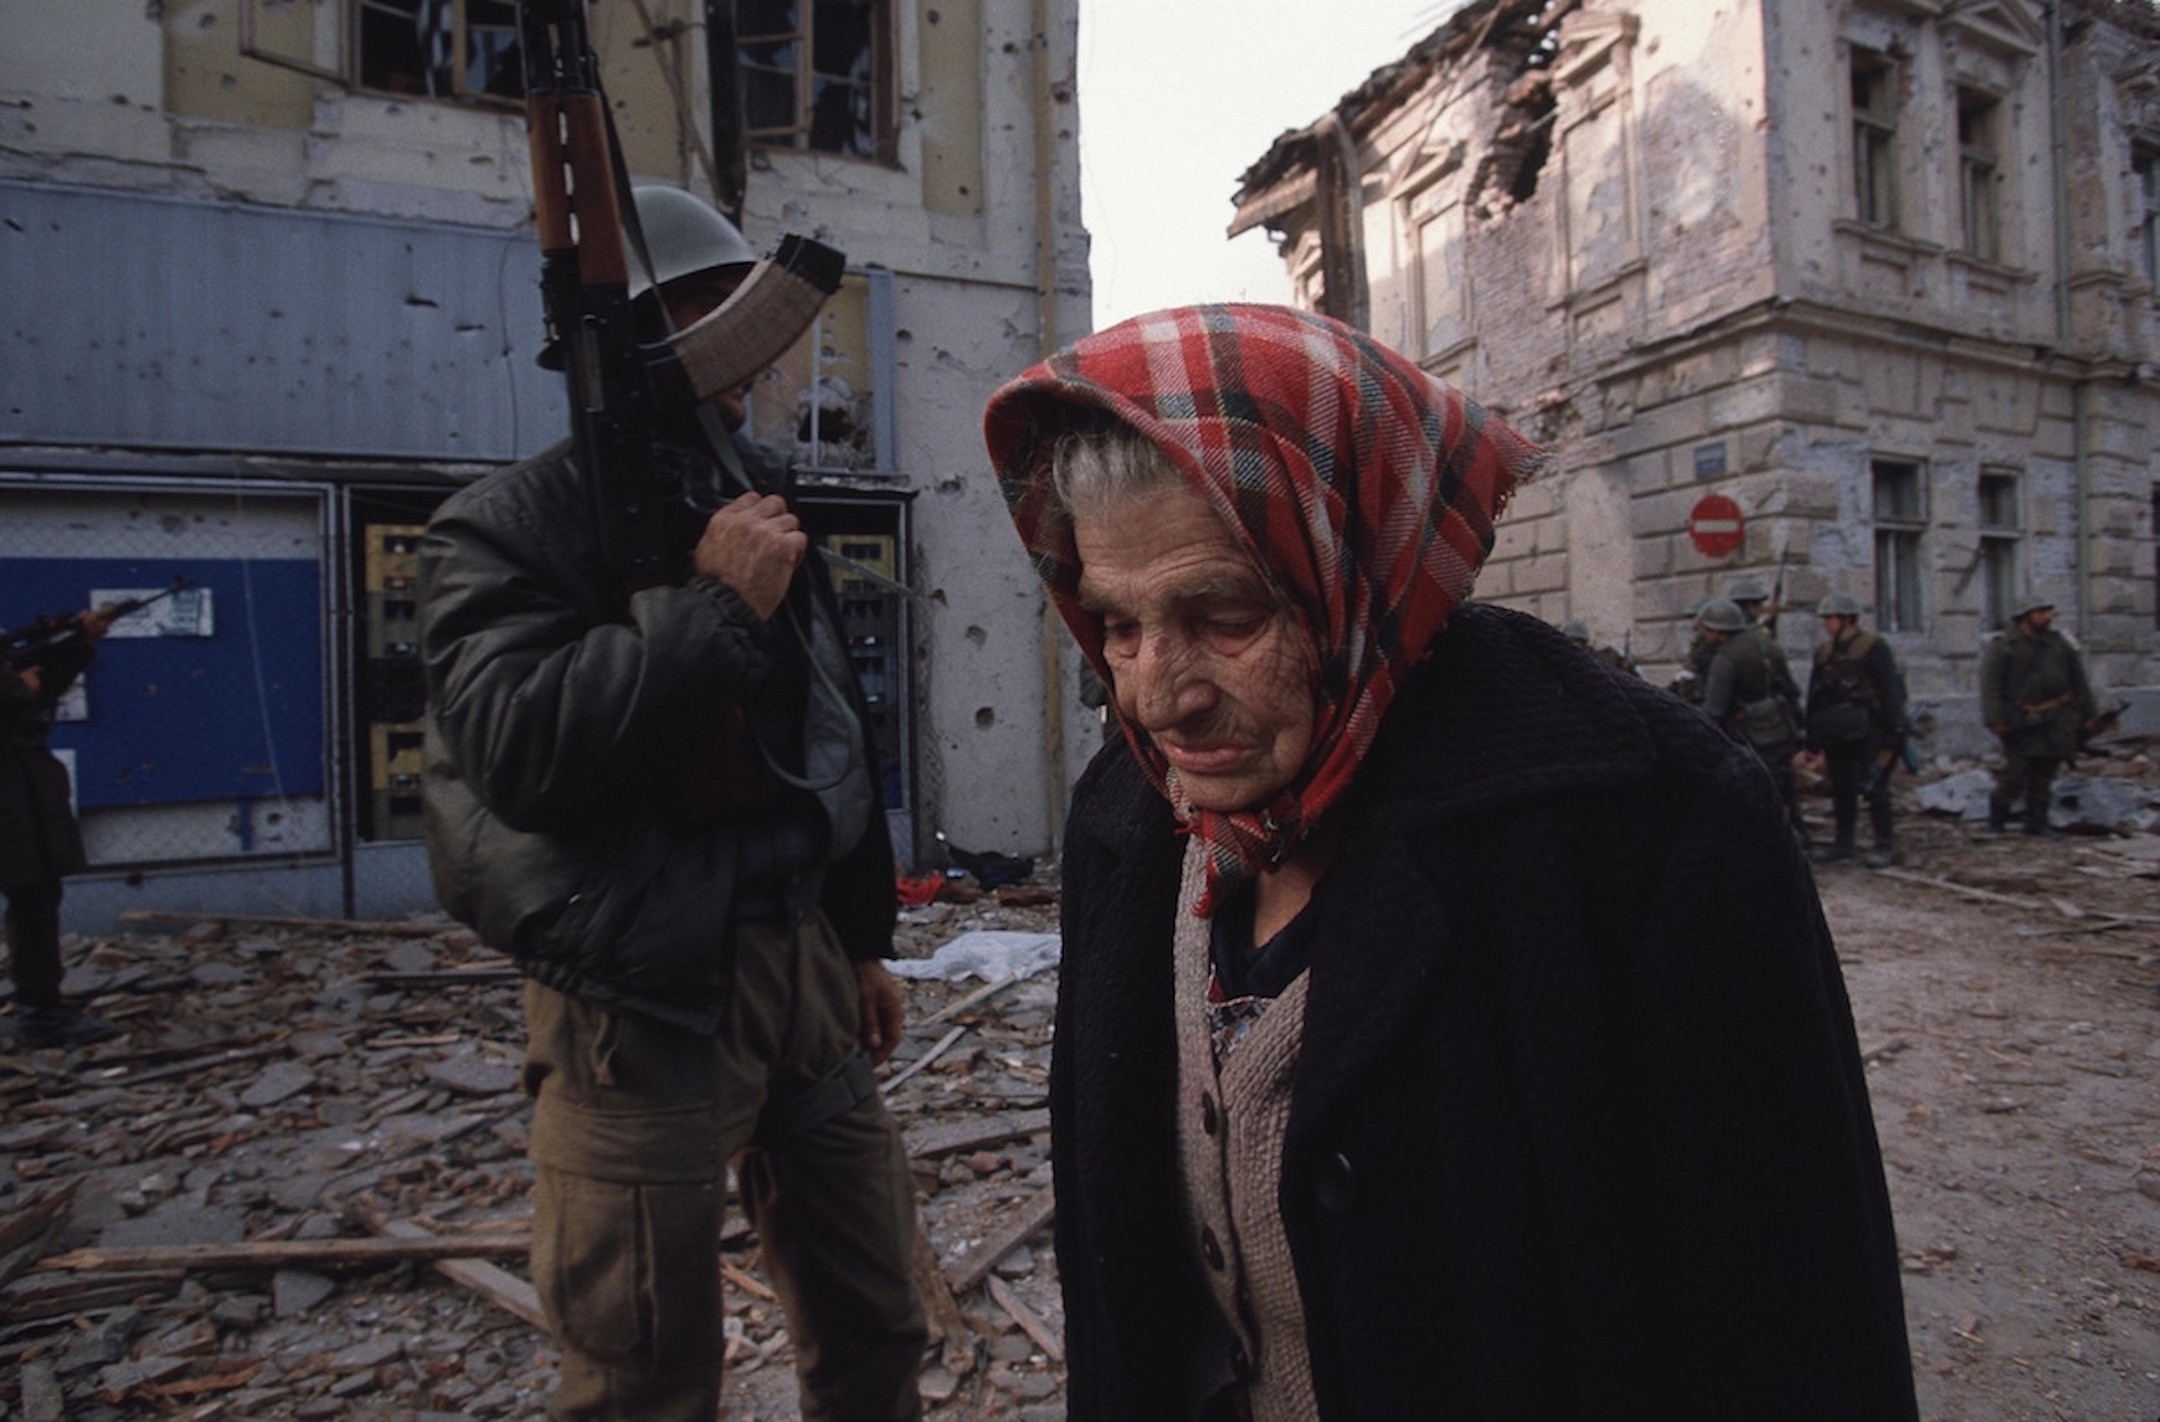 Ethnic Cleansing - A Croatian woman walks past a Serbian fighter as she leaves her destroyed city of Vukovar, Croatia, Nov. 24, 1991. Vukovar was under siege for three months by Serbian forces and completely destroyed., Image: 116177610, License: Rights-managed, Restrictions: Content available for editorial use, pre-approval required for all other uses.
This content not available to be downloaded through Quick Pic
Not available for license and invoicing to customers located in the Czech Republic.
Not available for license and invoicing to customers located in the Netherlands.
Not available for license and invoicing to customers located in India.
Not available for license and invoicing to customers located in Italy.
Not available for license and invoicing to customers located in Finland., Model Release: no, Credit line: Profimedia, Corbis VII